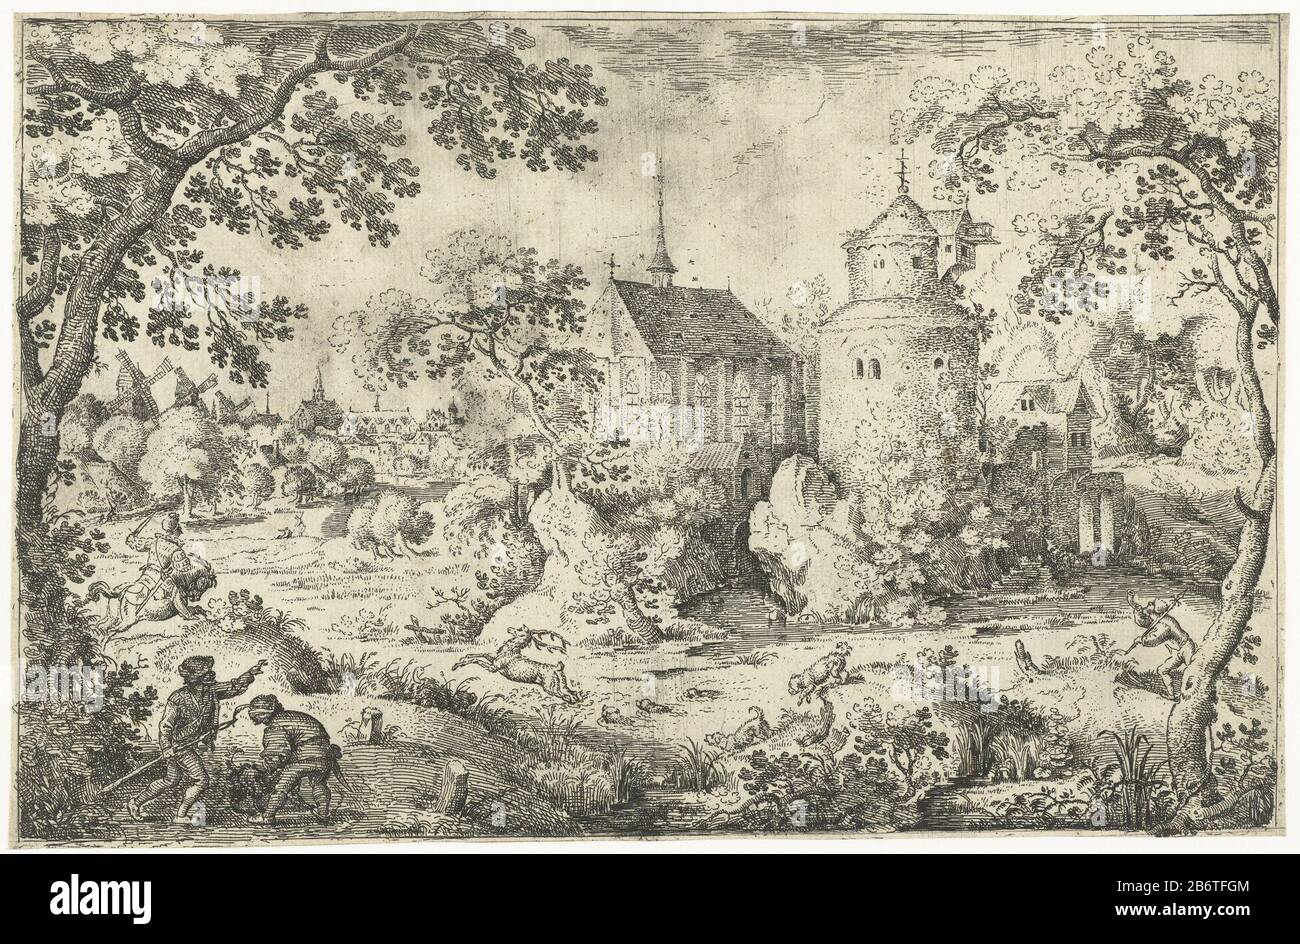 in a wooded swamp near a village and a chapel chasing some men with their dogs at a deer. Counterpart of 'Deer Hunting in moeras'. Manufacturer : printmaker Jacob Savery (I) Place manufacture: Netherlands Date: 1602 Physical features: etching material: paper Technique: etching Dimensions: sheet: H 184 mm × W 284 mm Subject: stag-hunting sports, games  animals (+ hunting with dogs) hoofed animals: deer Stock Photo